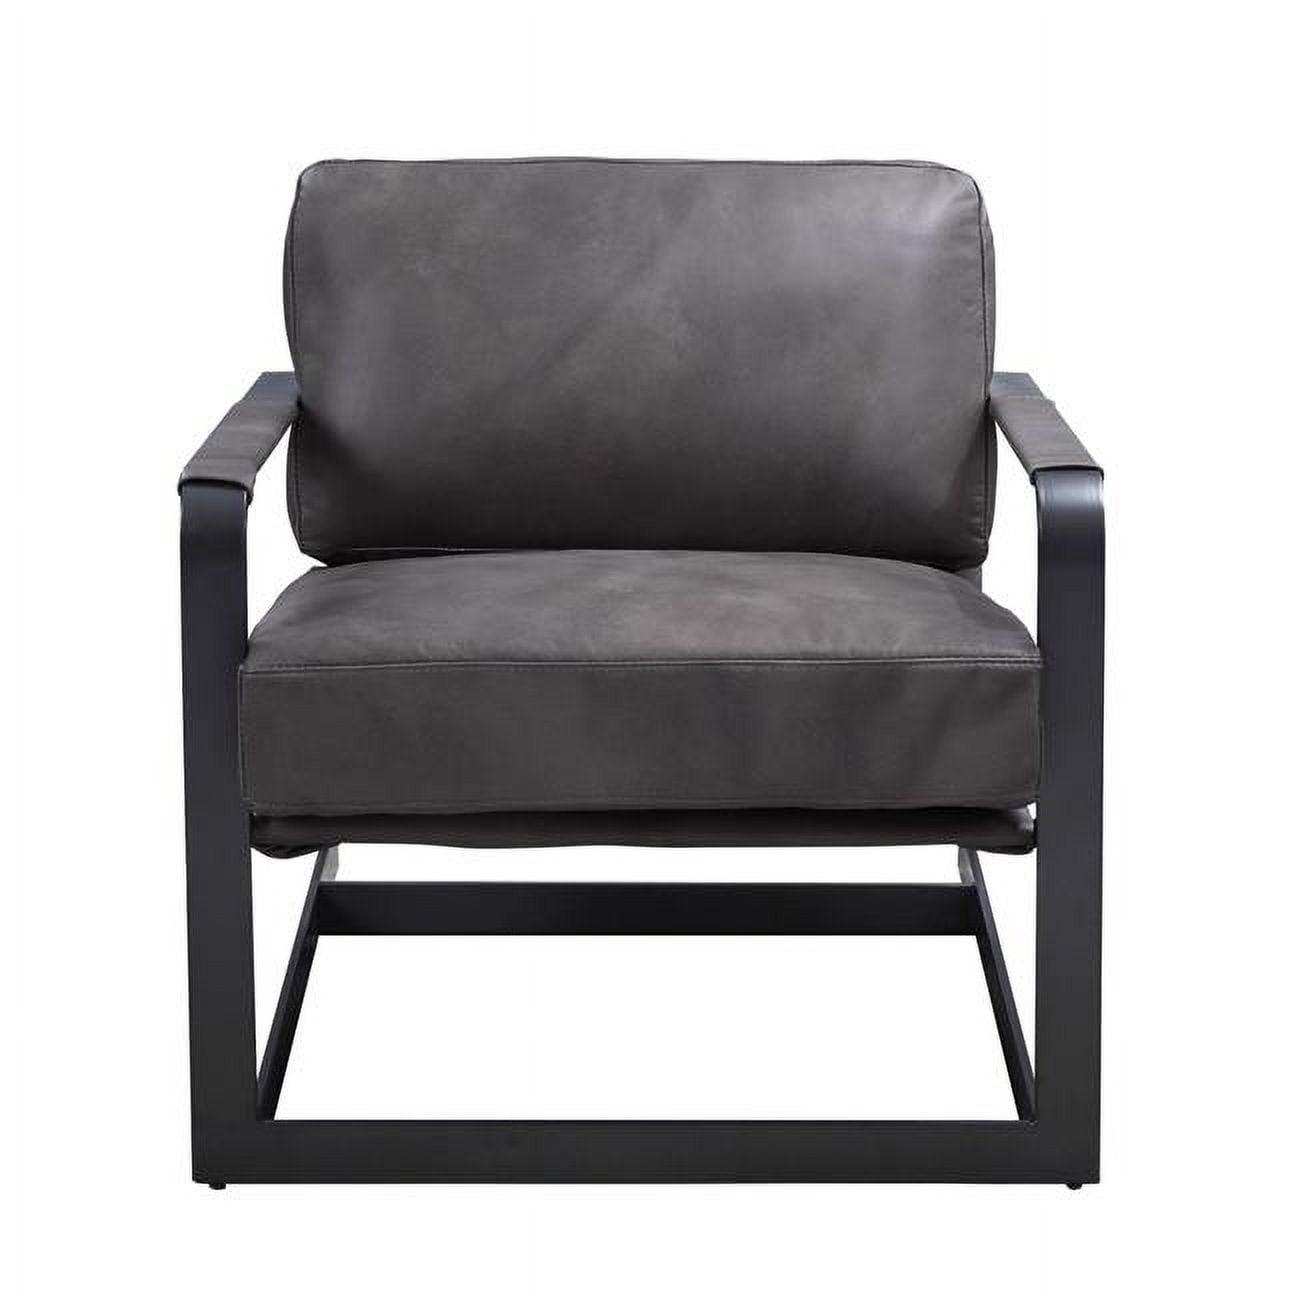 Locnos 33" Gray Top Grain Leather & Metal Frame Accent Chair